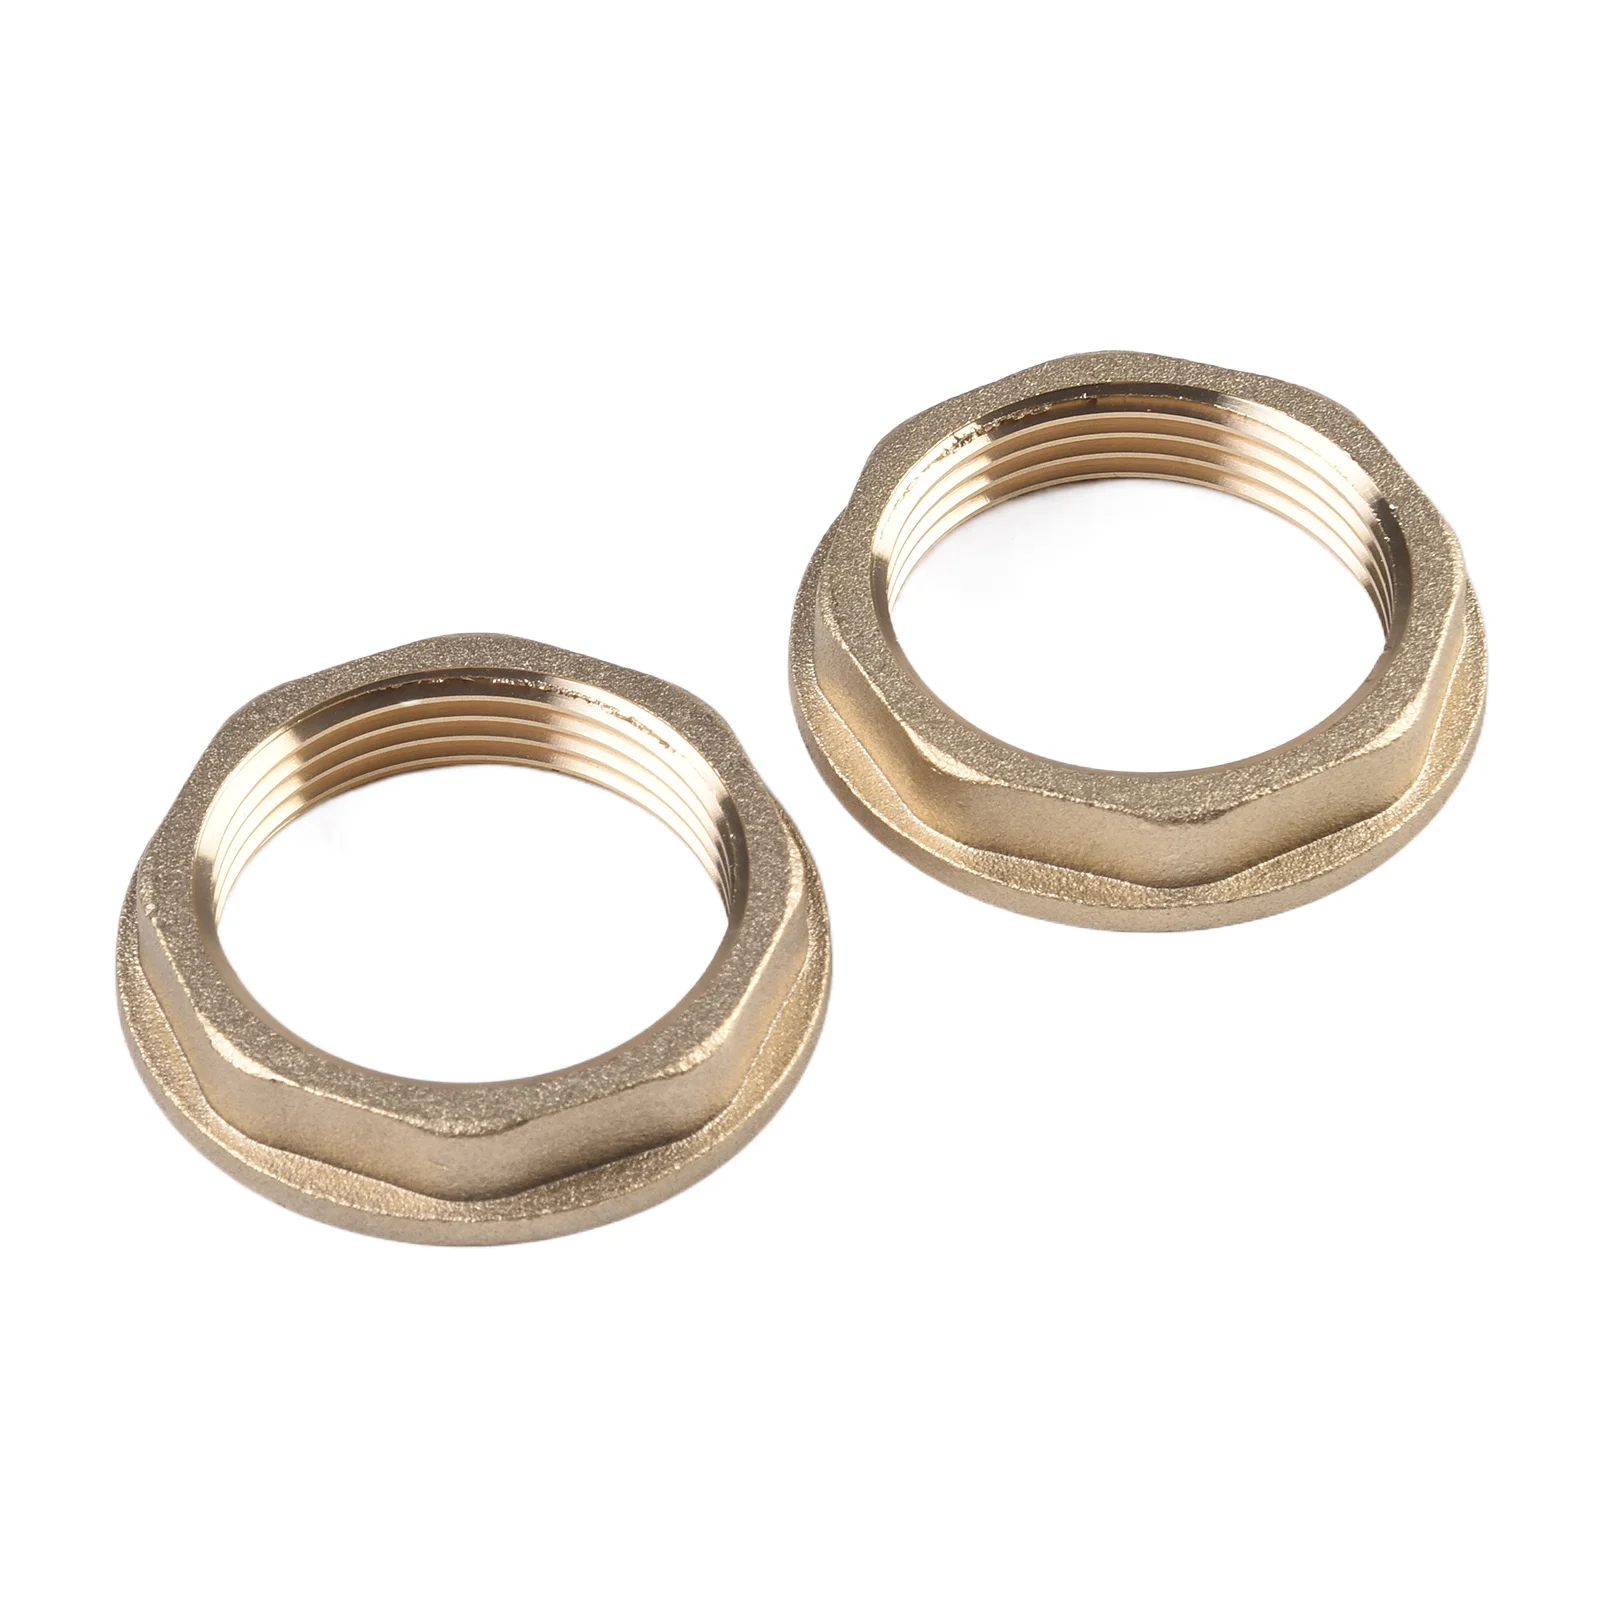 

2Pc 1-1/4inch Brass Back Nut For Wash Hand Basin/Bathroom Sink Replace Accessories Bathroom&Kitchen Hardware Fittings